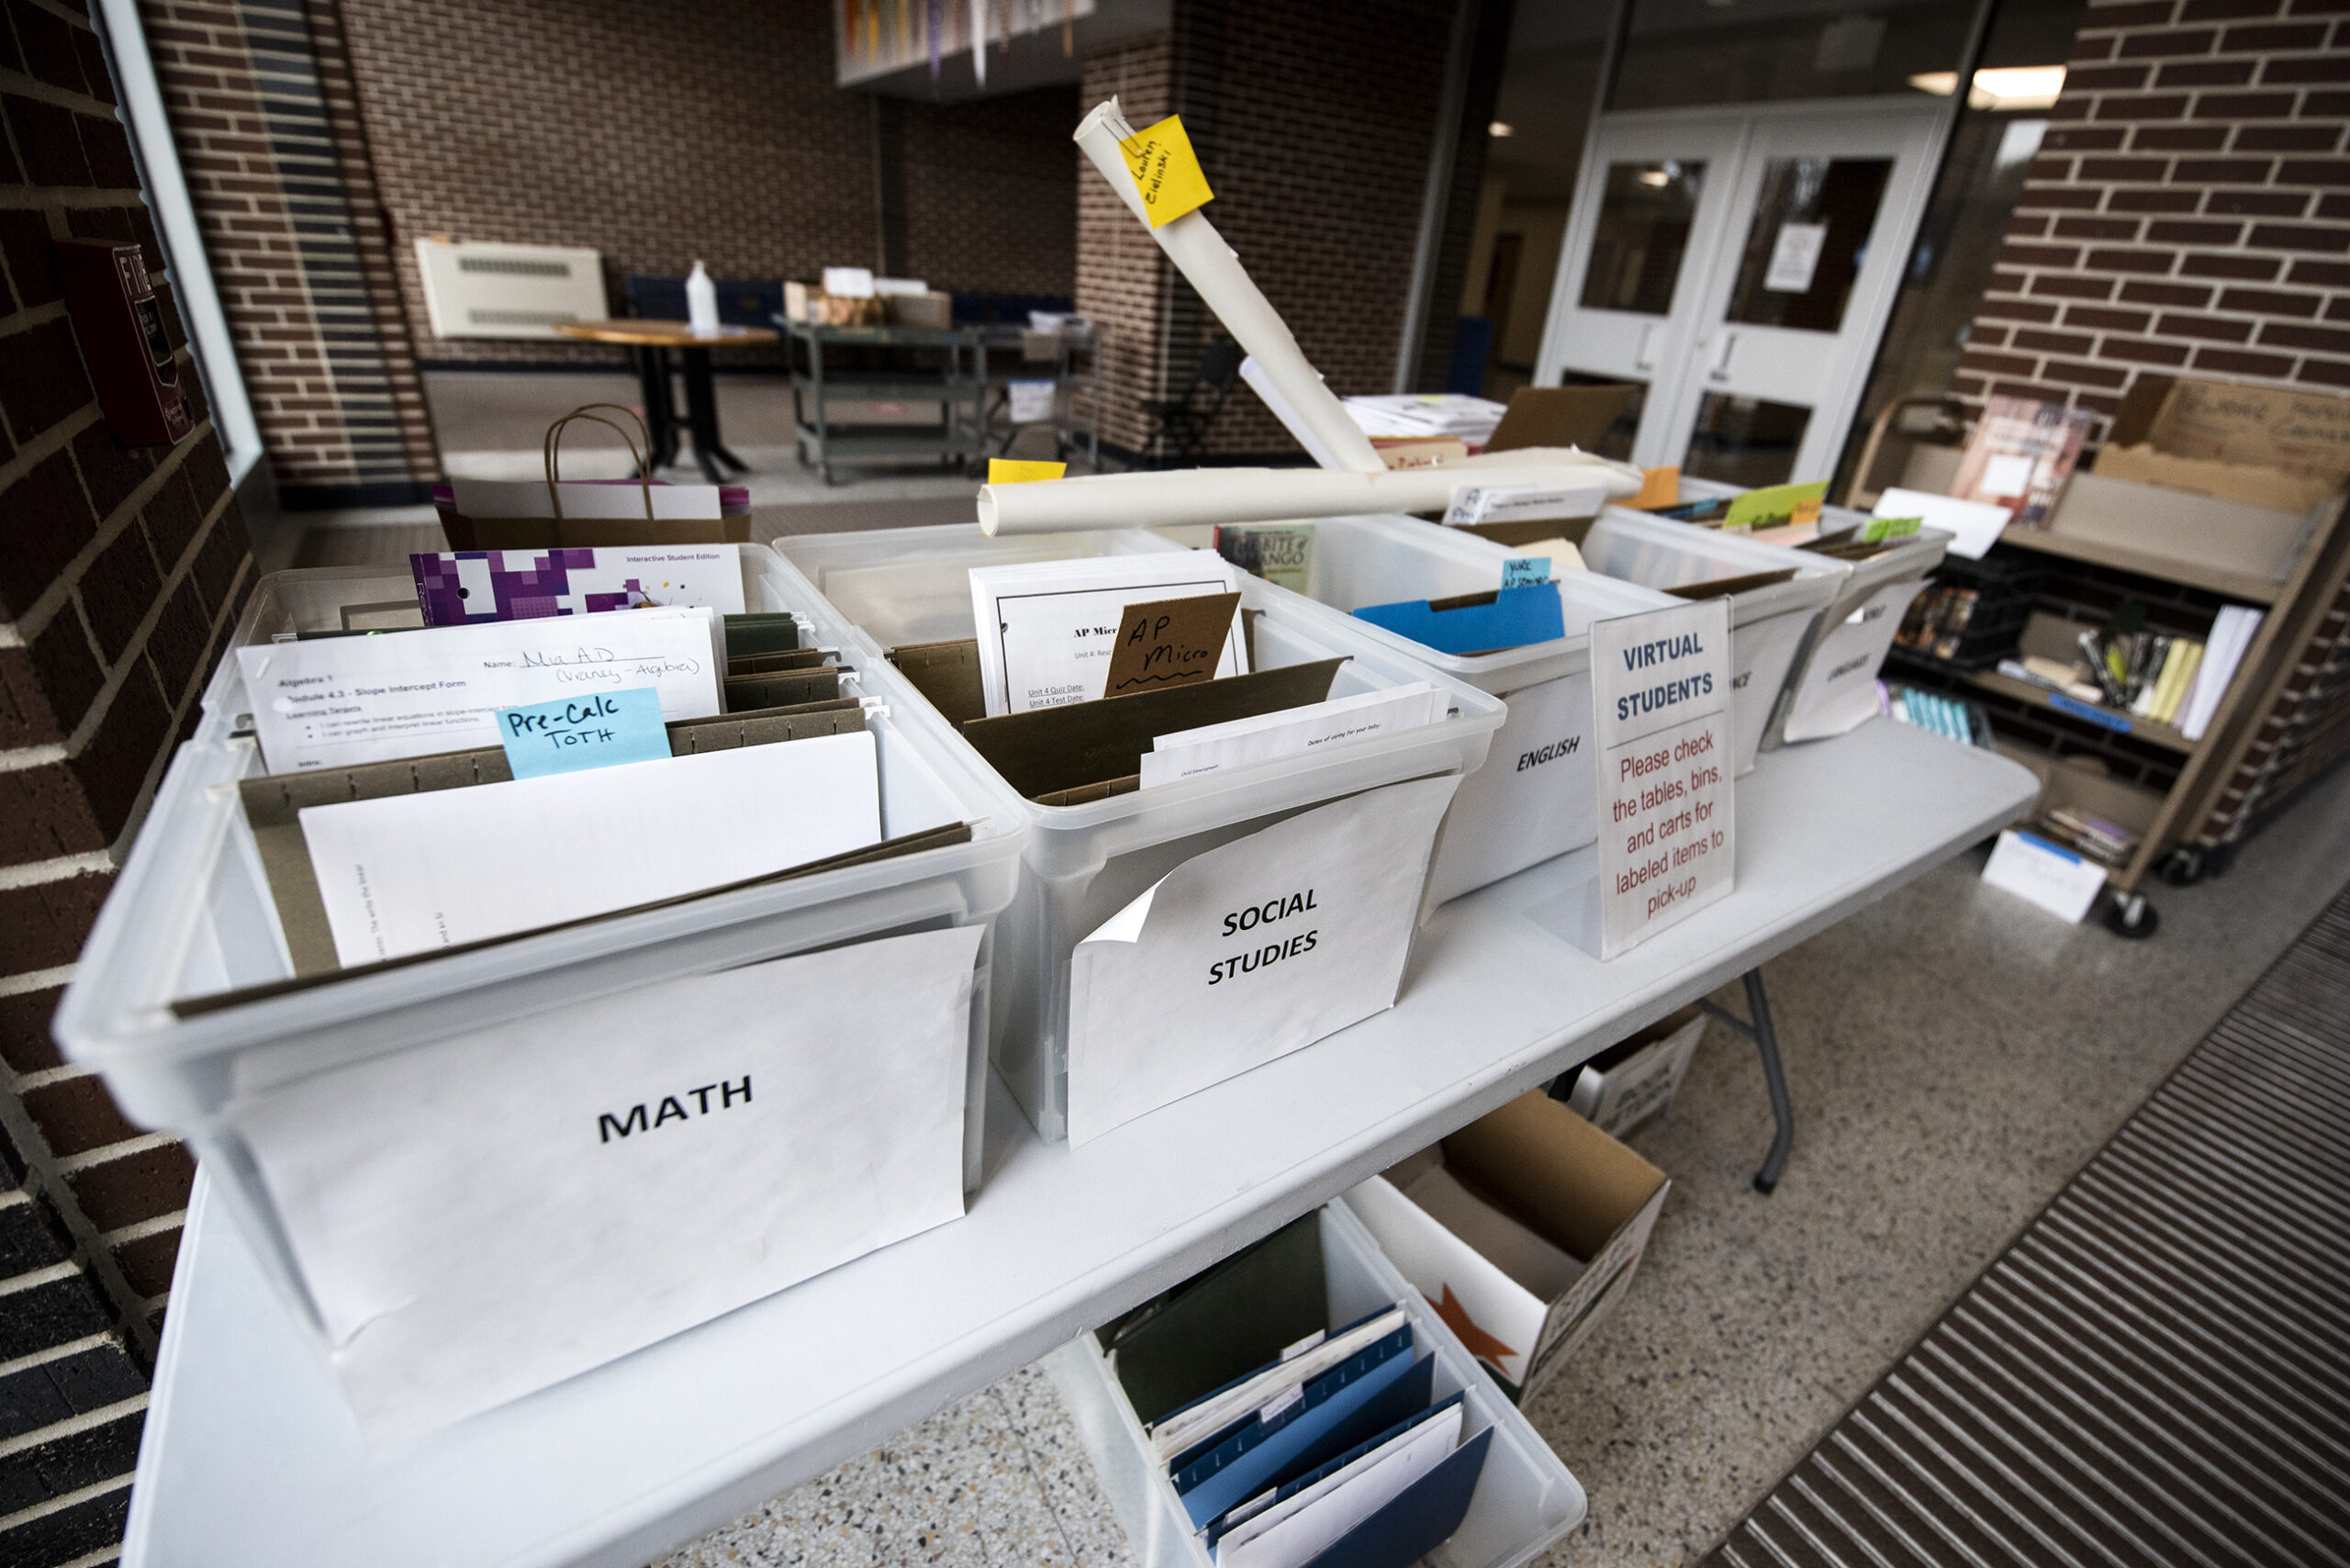 Boxes of papers in folders are placed on tables in a school lobby.